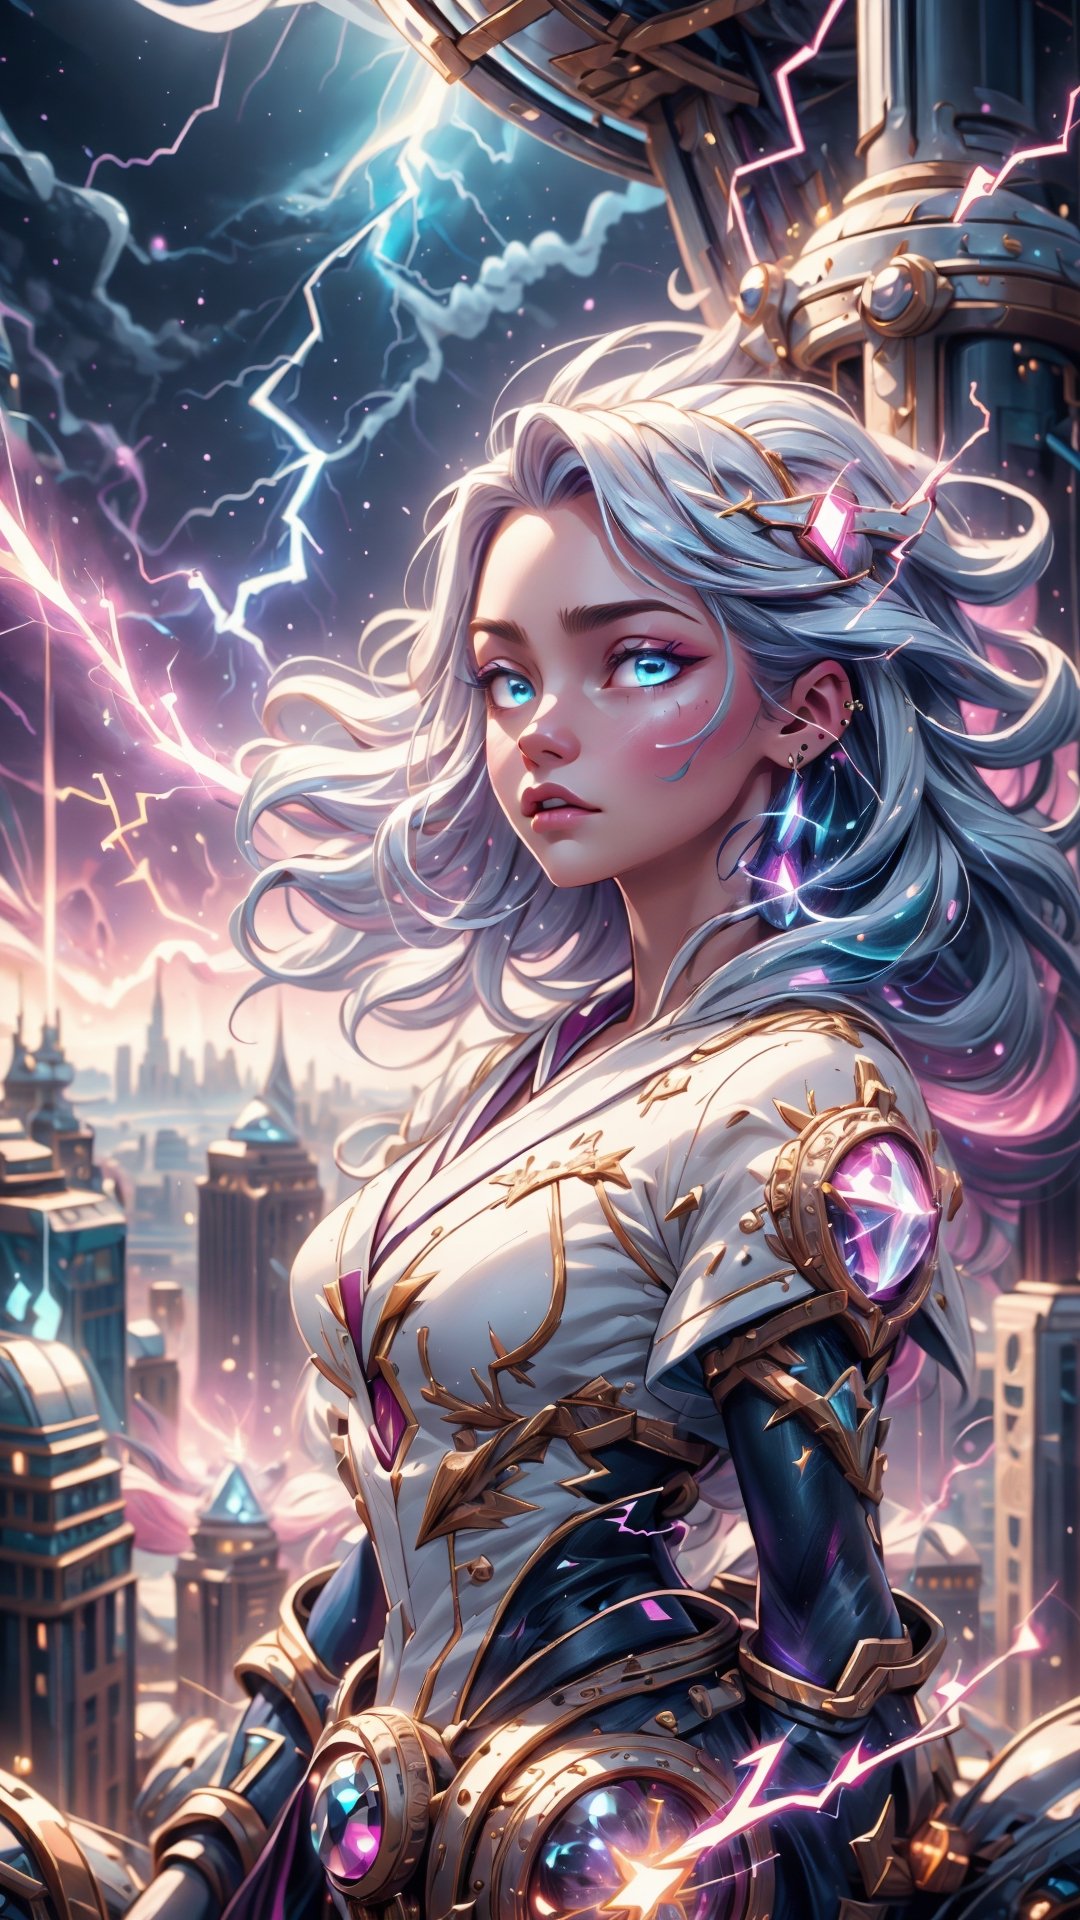 (4k), (masterpiece), (best quality),(extremely intricate), (realistic), (sharp focus), (award winning), (cinematic lighting), (extremely detailed), 

A young sorceress with long cerulean blue hair and piercing blue eyes, standing on top of a high rise building of new york. She is wearing a flowing pure white robe with silver lightning bolts embroidered on it. Her staff is in her hand, and it is crackling with electricity. She is surrounded by a swirling vortex of lightning energy.,DonMl1ghtning,DonMC3l3st14l3xpl0r3rsXL